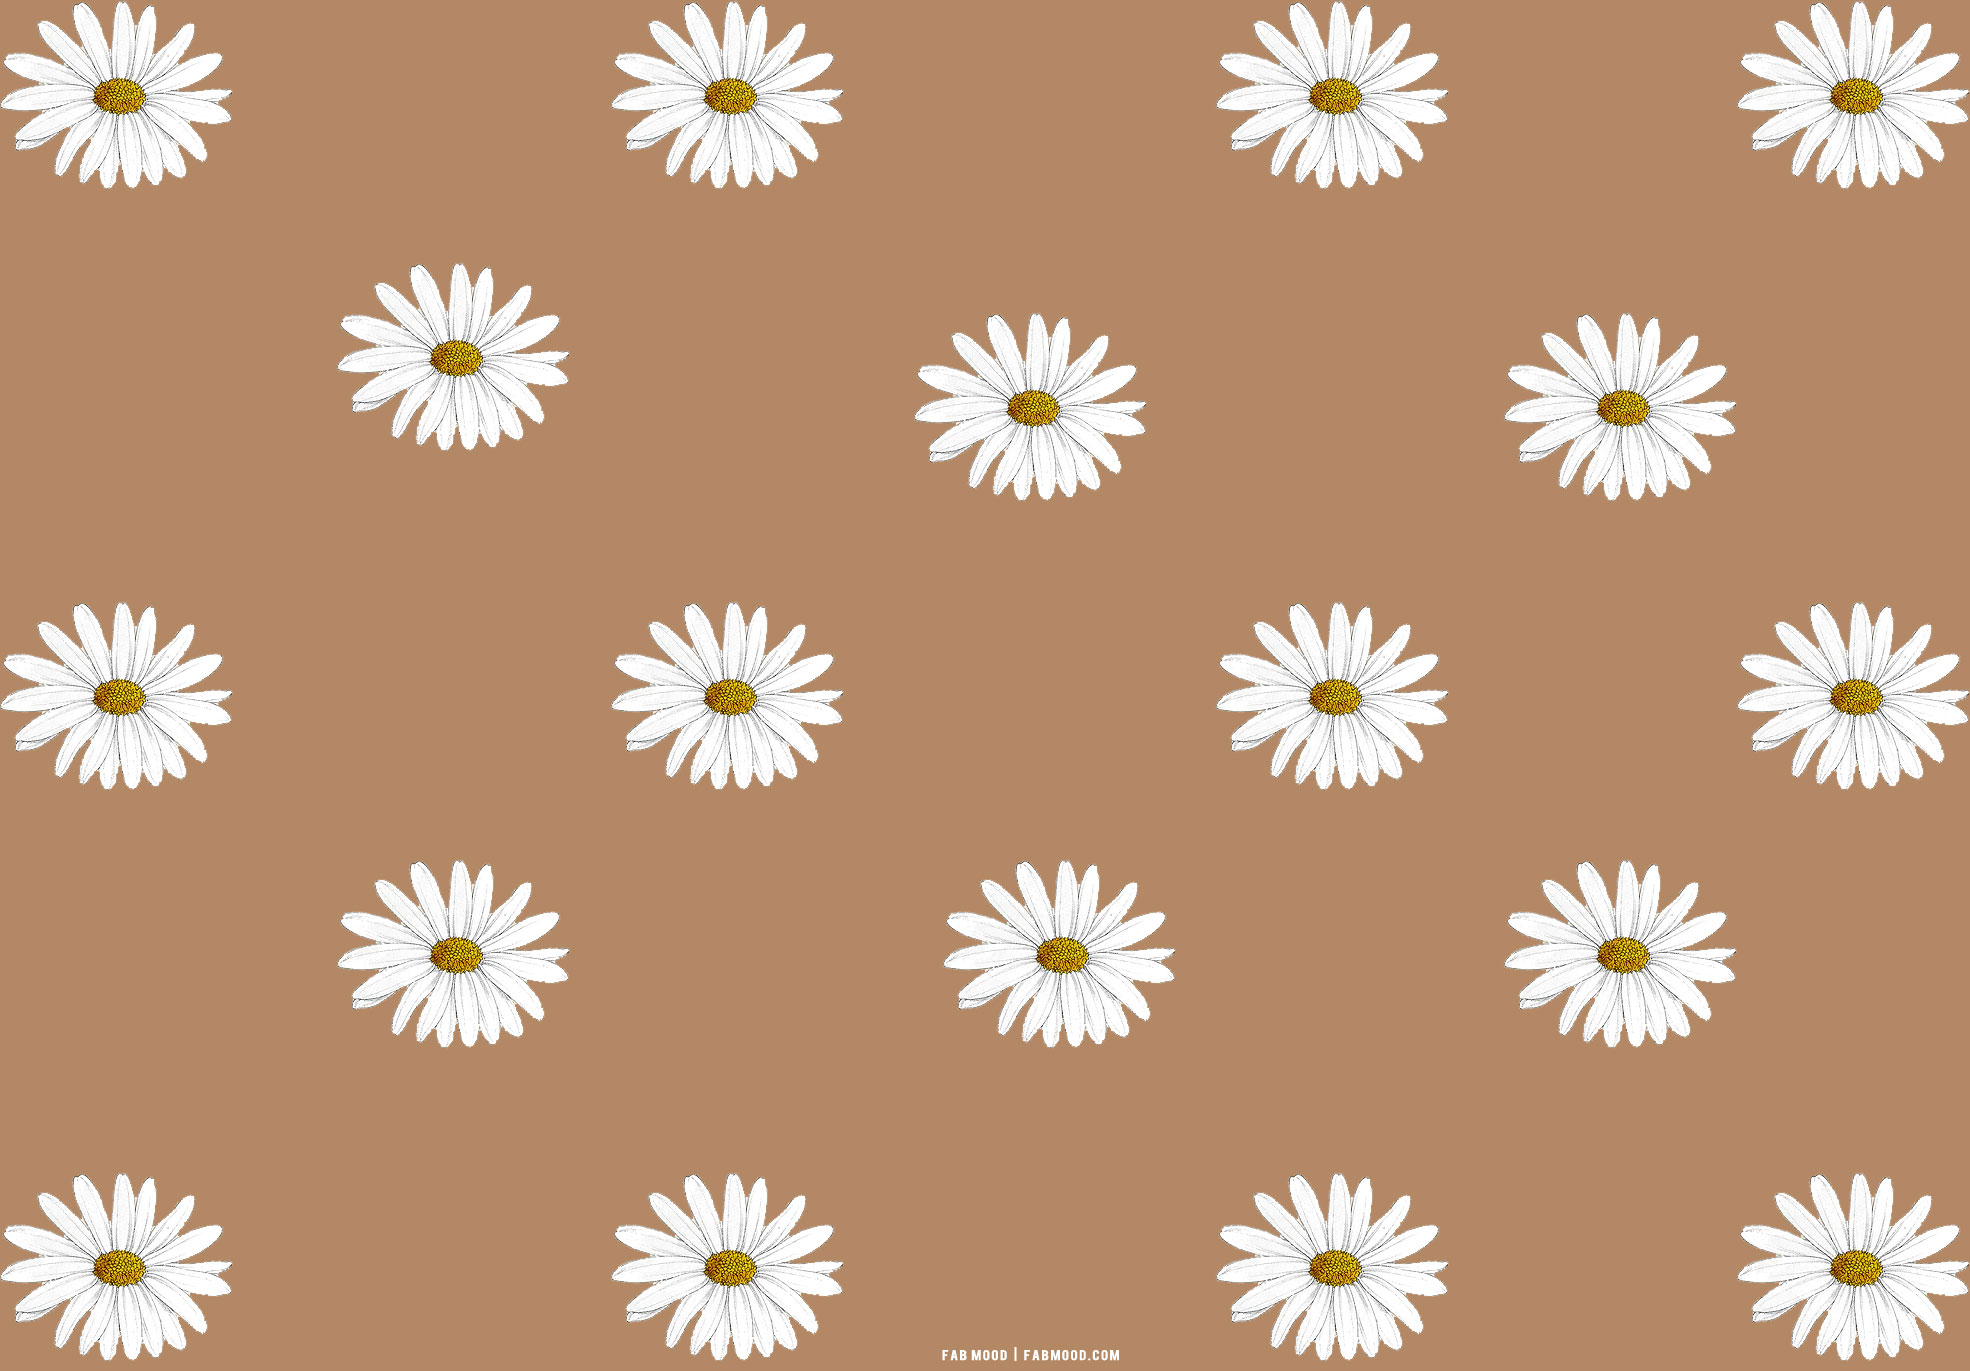 4.2 (17) You are reading: 25 Brown Aesthetic Wallpaper for Laptop : Daisy D...